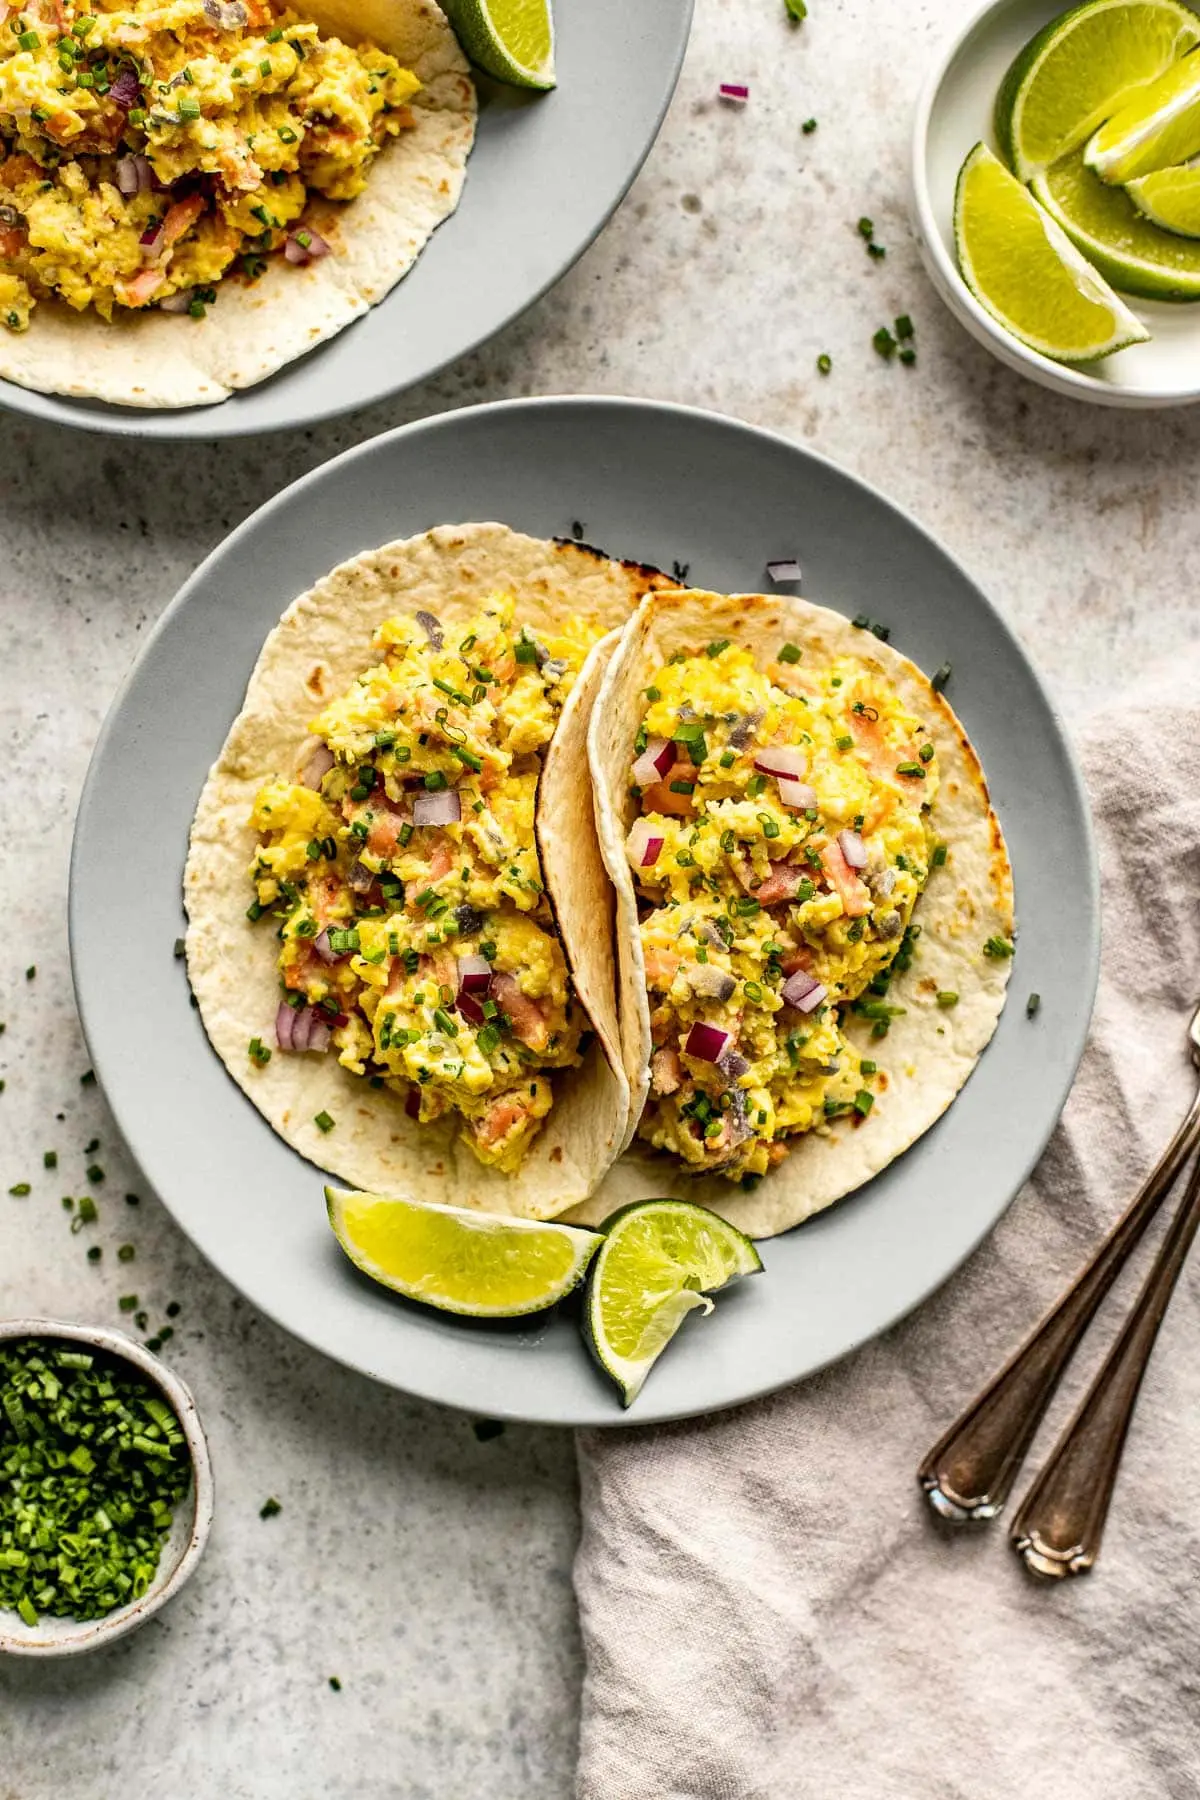 smoked salmon breakfast tacos - What do breakfast tacos contain